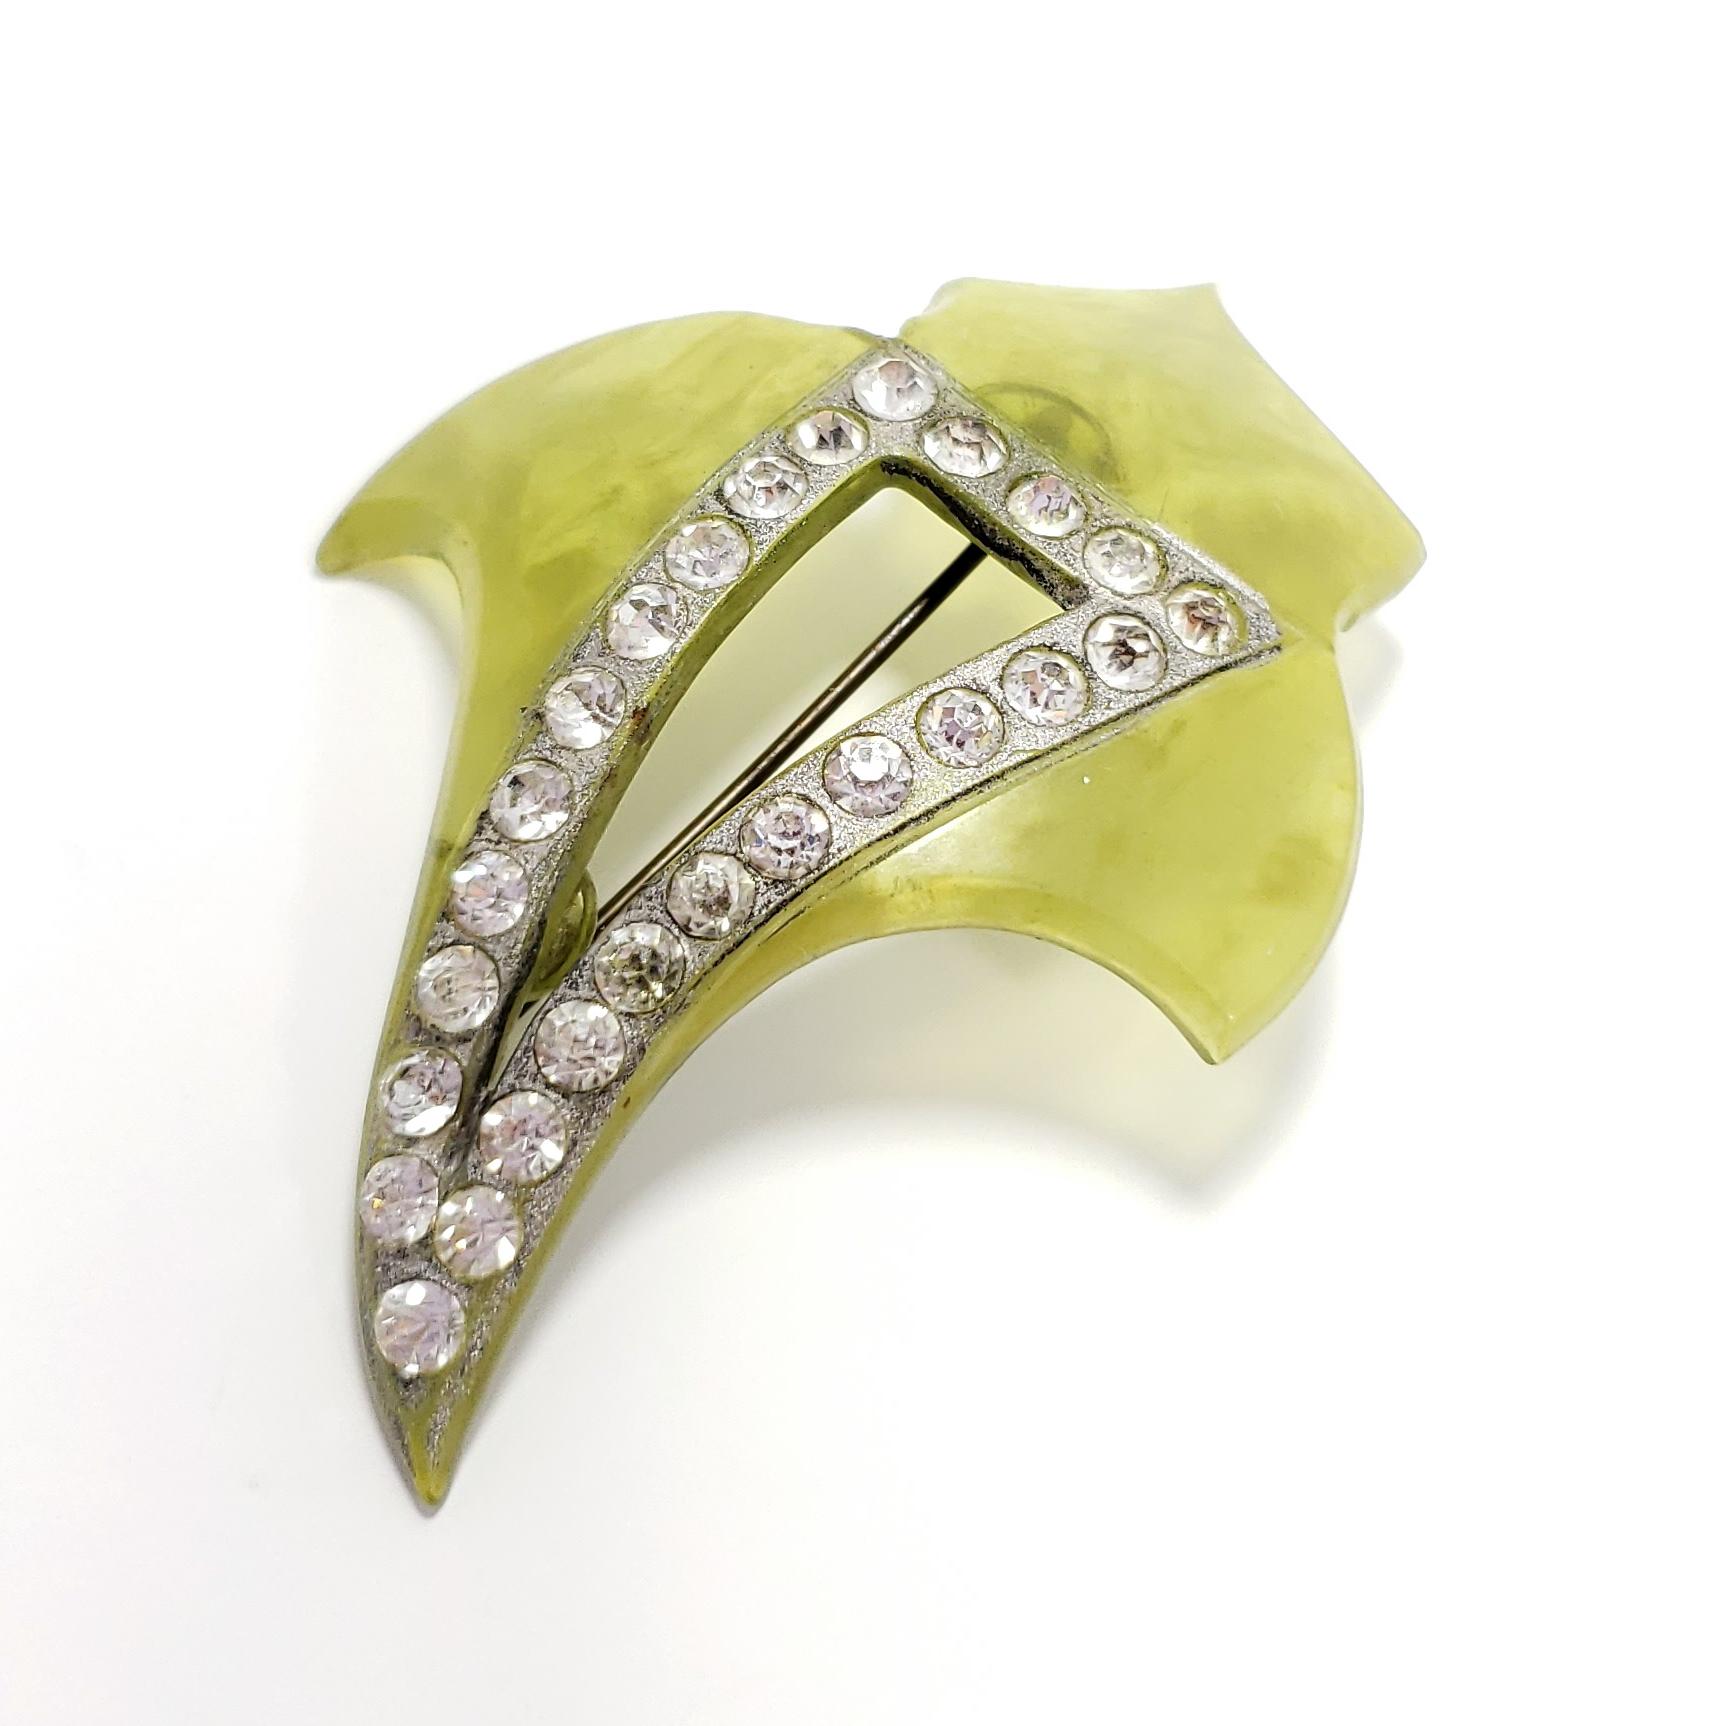 Fabulous bakelite leaf pin in vintage, marbled, apple green. Accented with sparkling white crystals. 

Wonderful condition, circa early 1900s.

